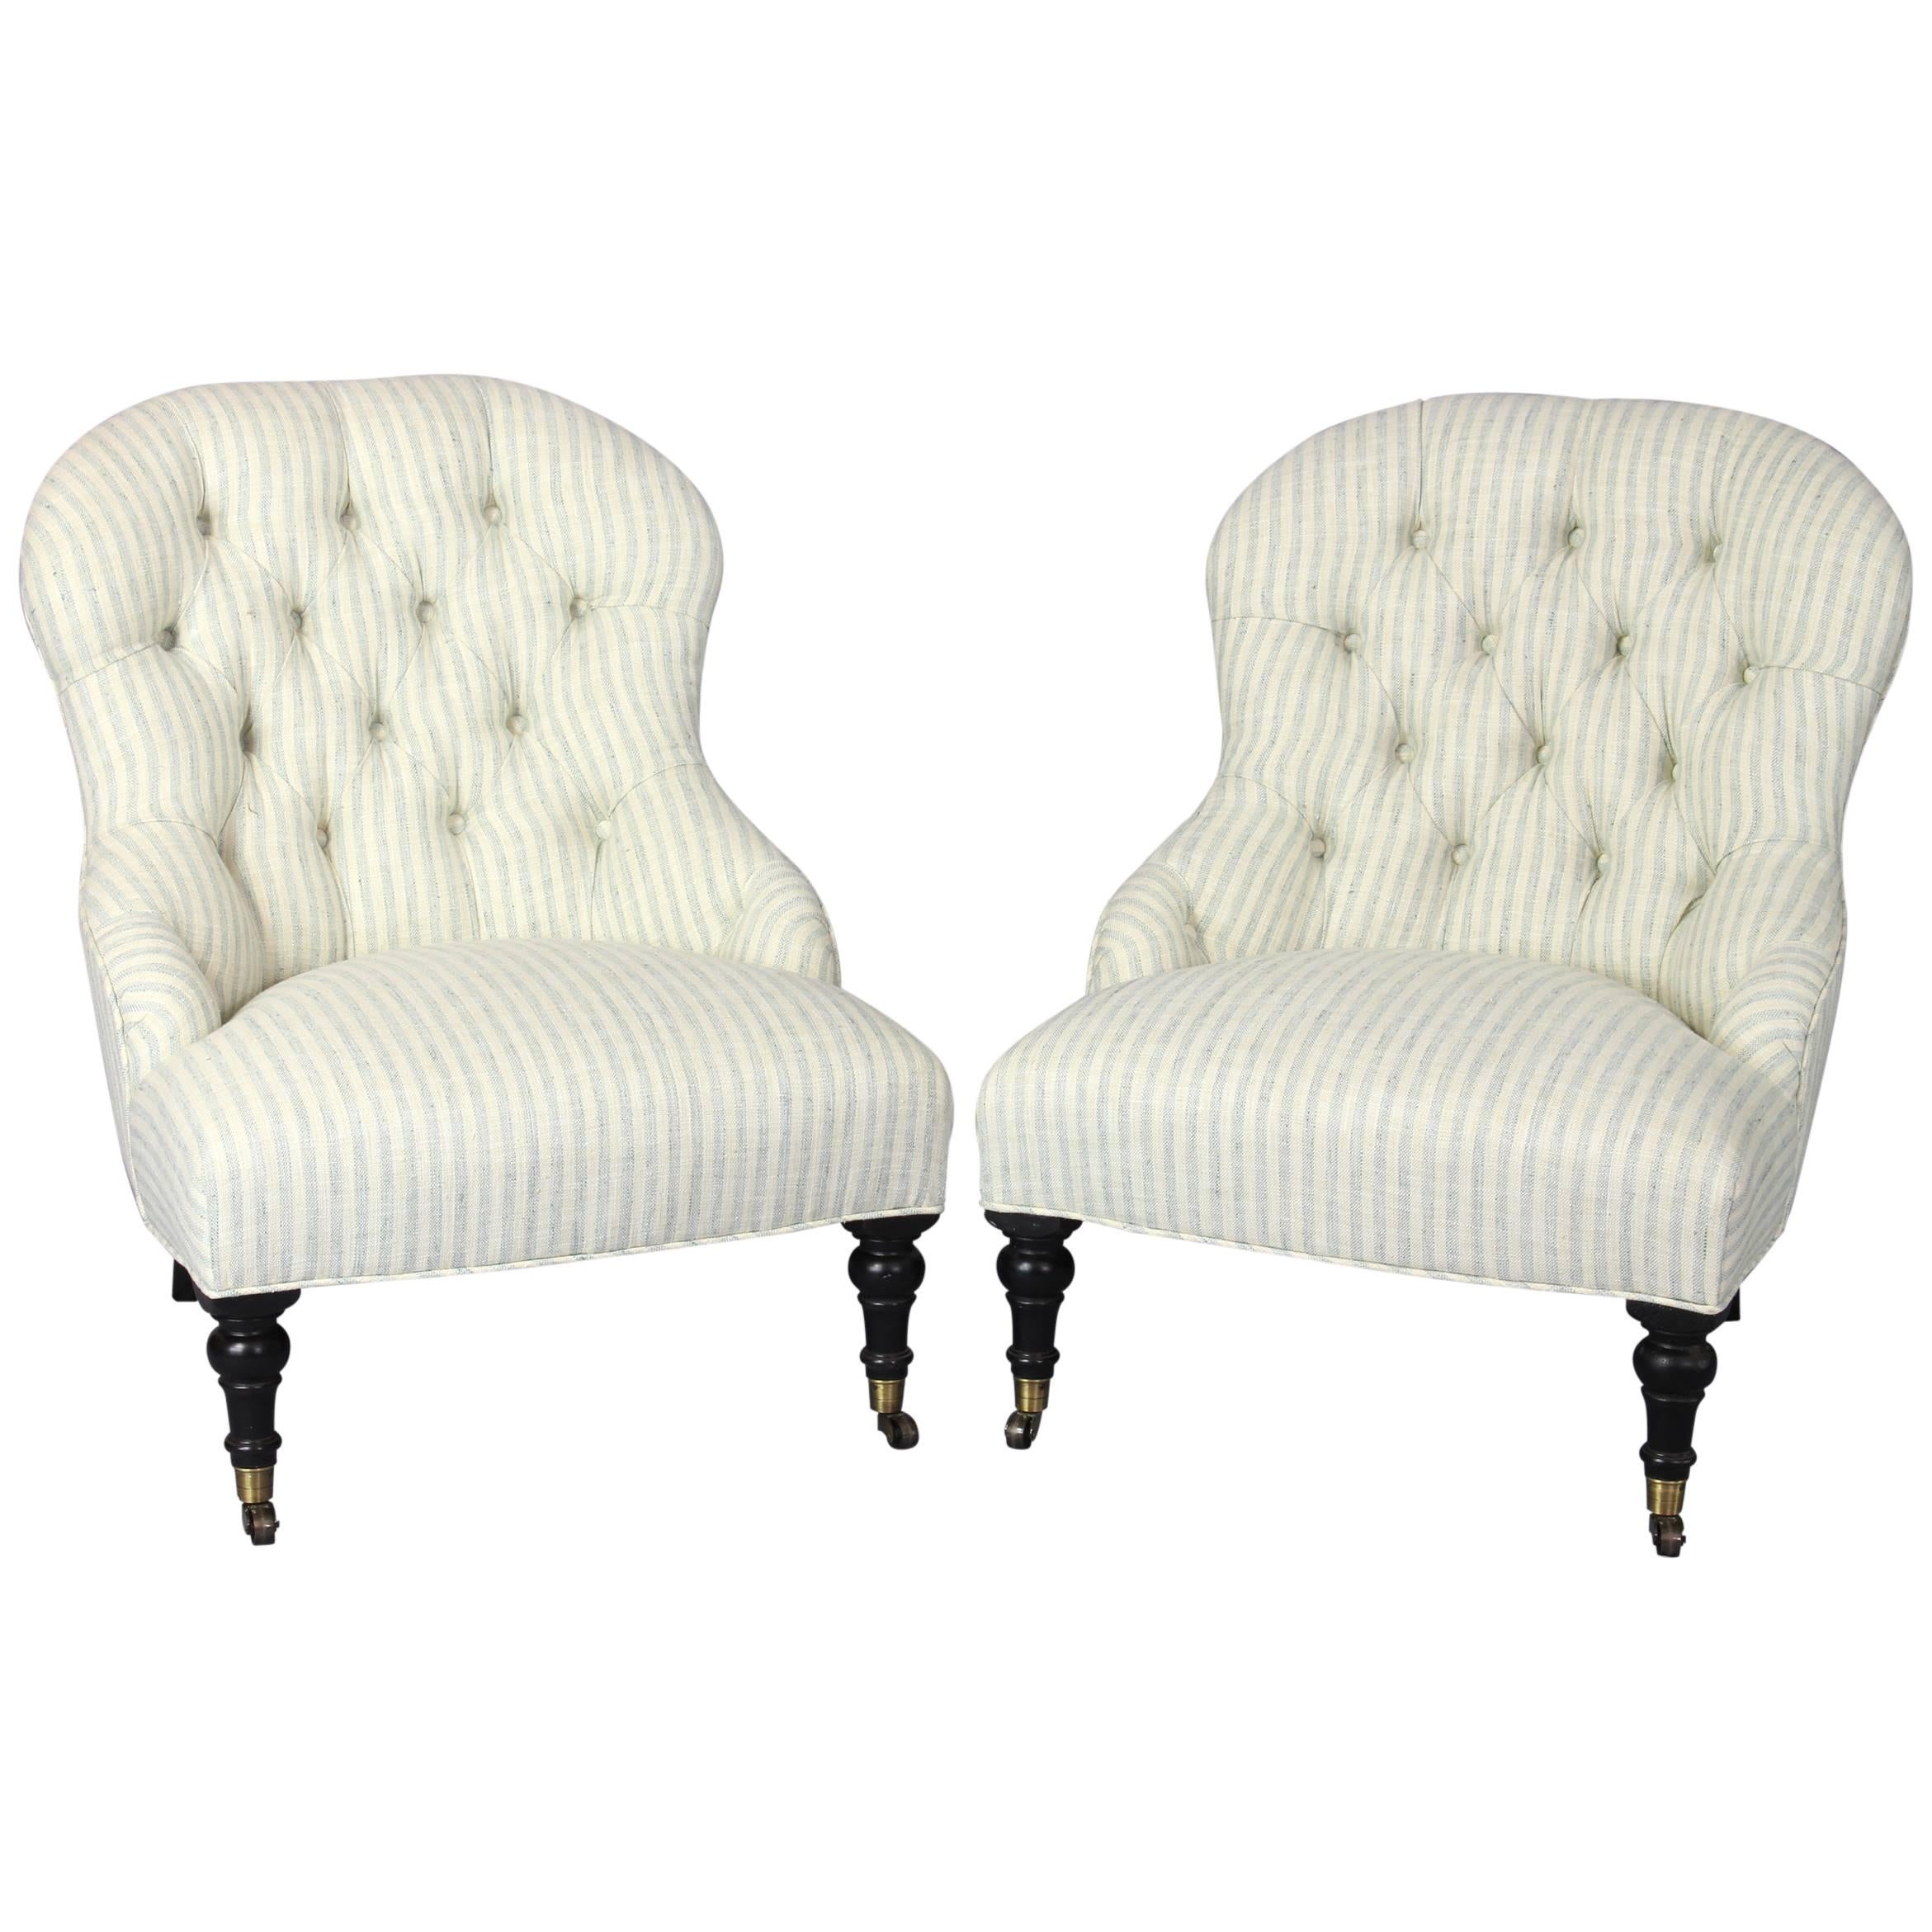 Pair of Edwardian Style Slipper Chairs